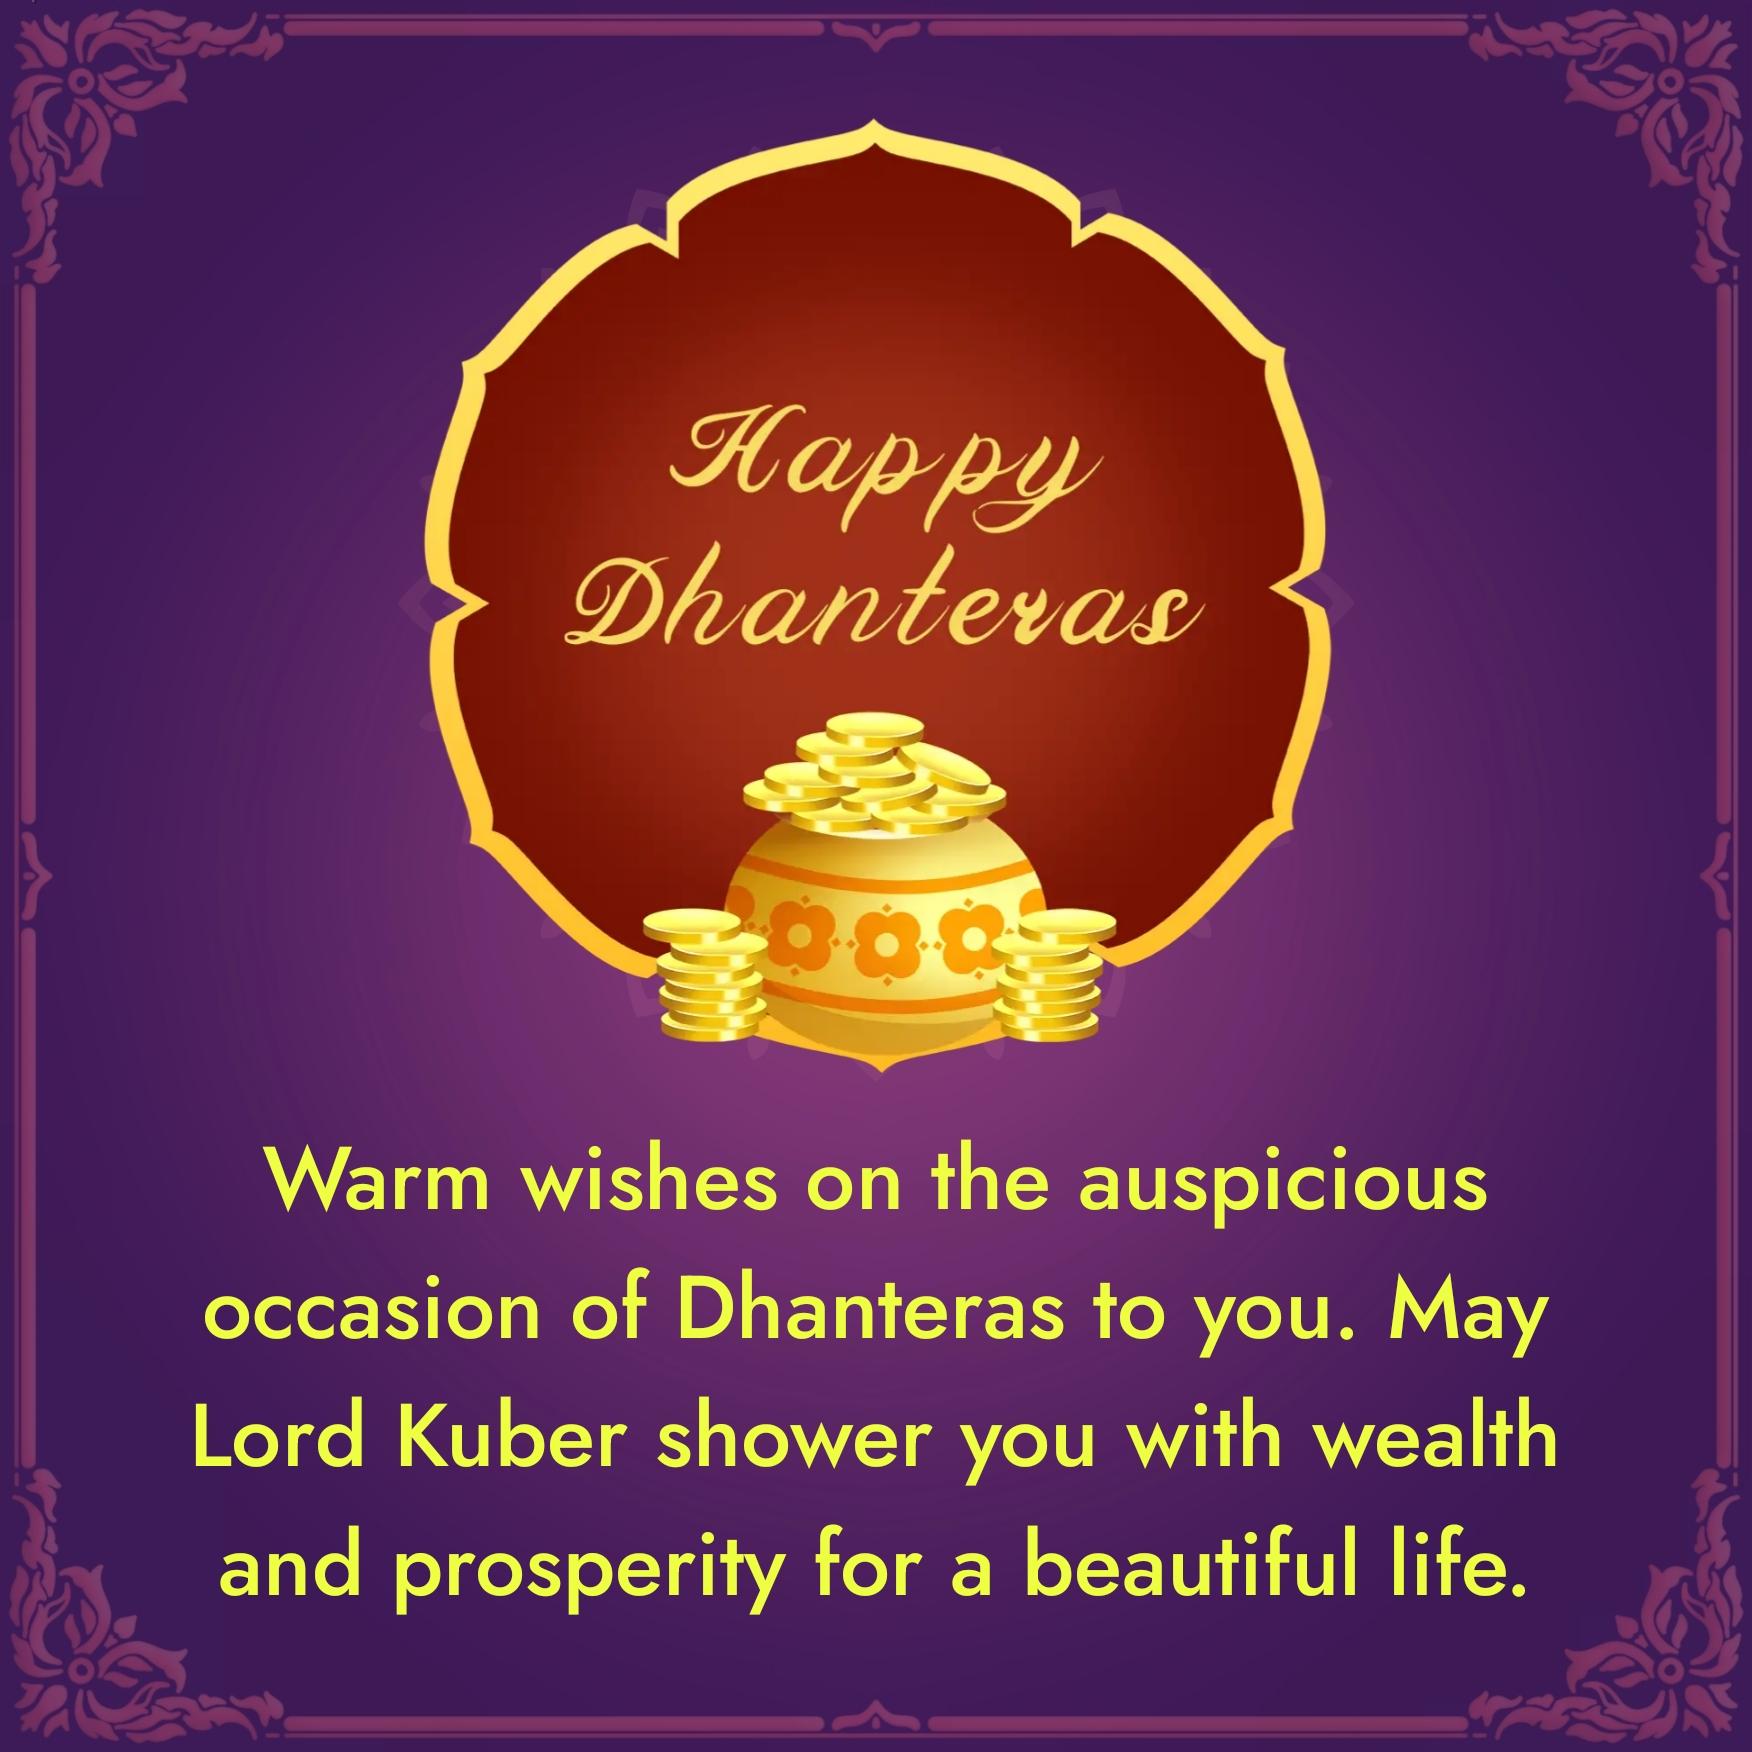 Warm wishes on the auspicious occasion of Dhanteras